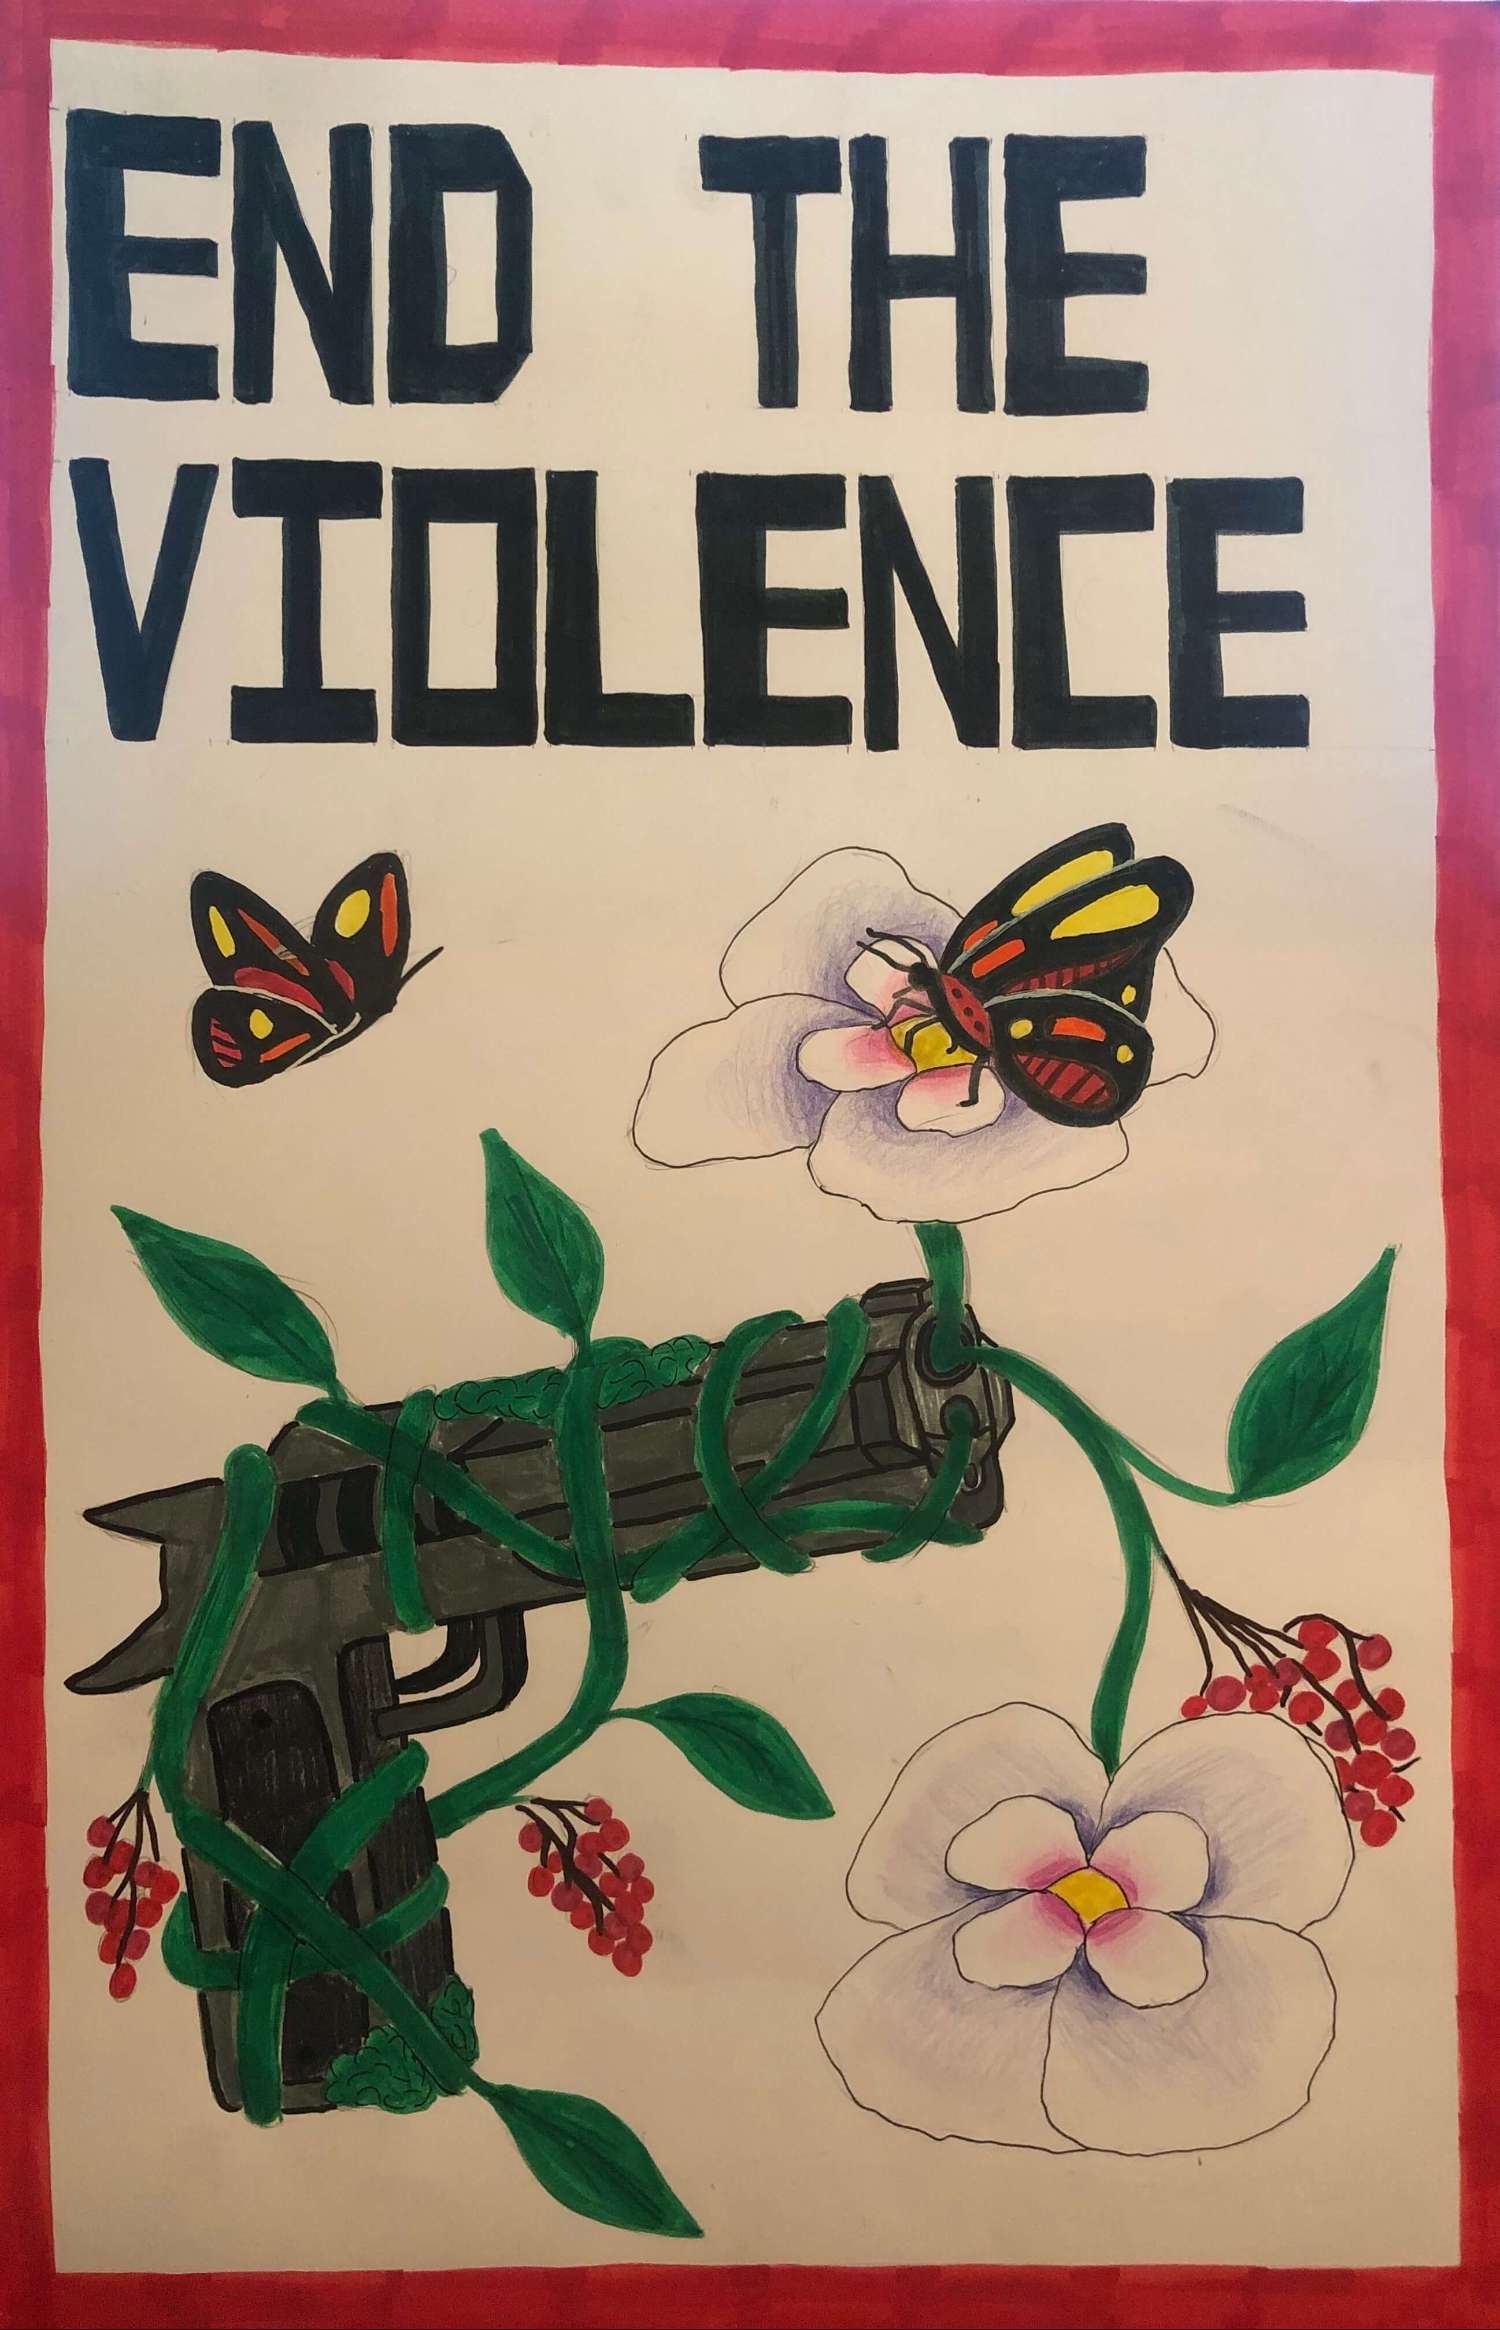 Ally Wright 3rd place (Middle School)
Snowden School

The inspiration behind my “Silence the Violence” entry was mainly the calming feeling that nature brings. I wanted to bring peace to something that was normally not associated with the idea of pea